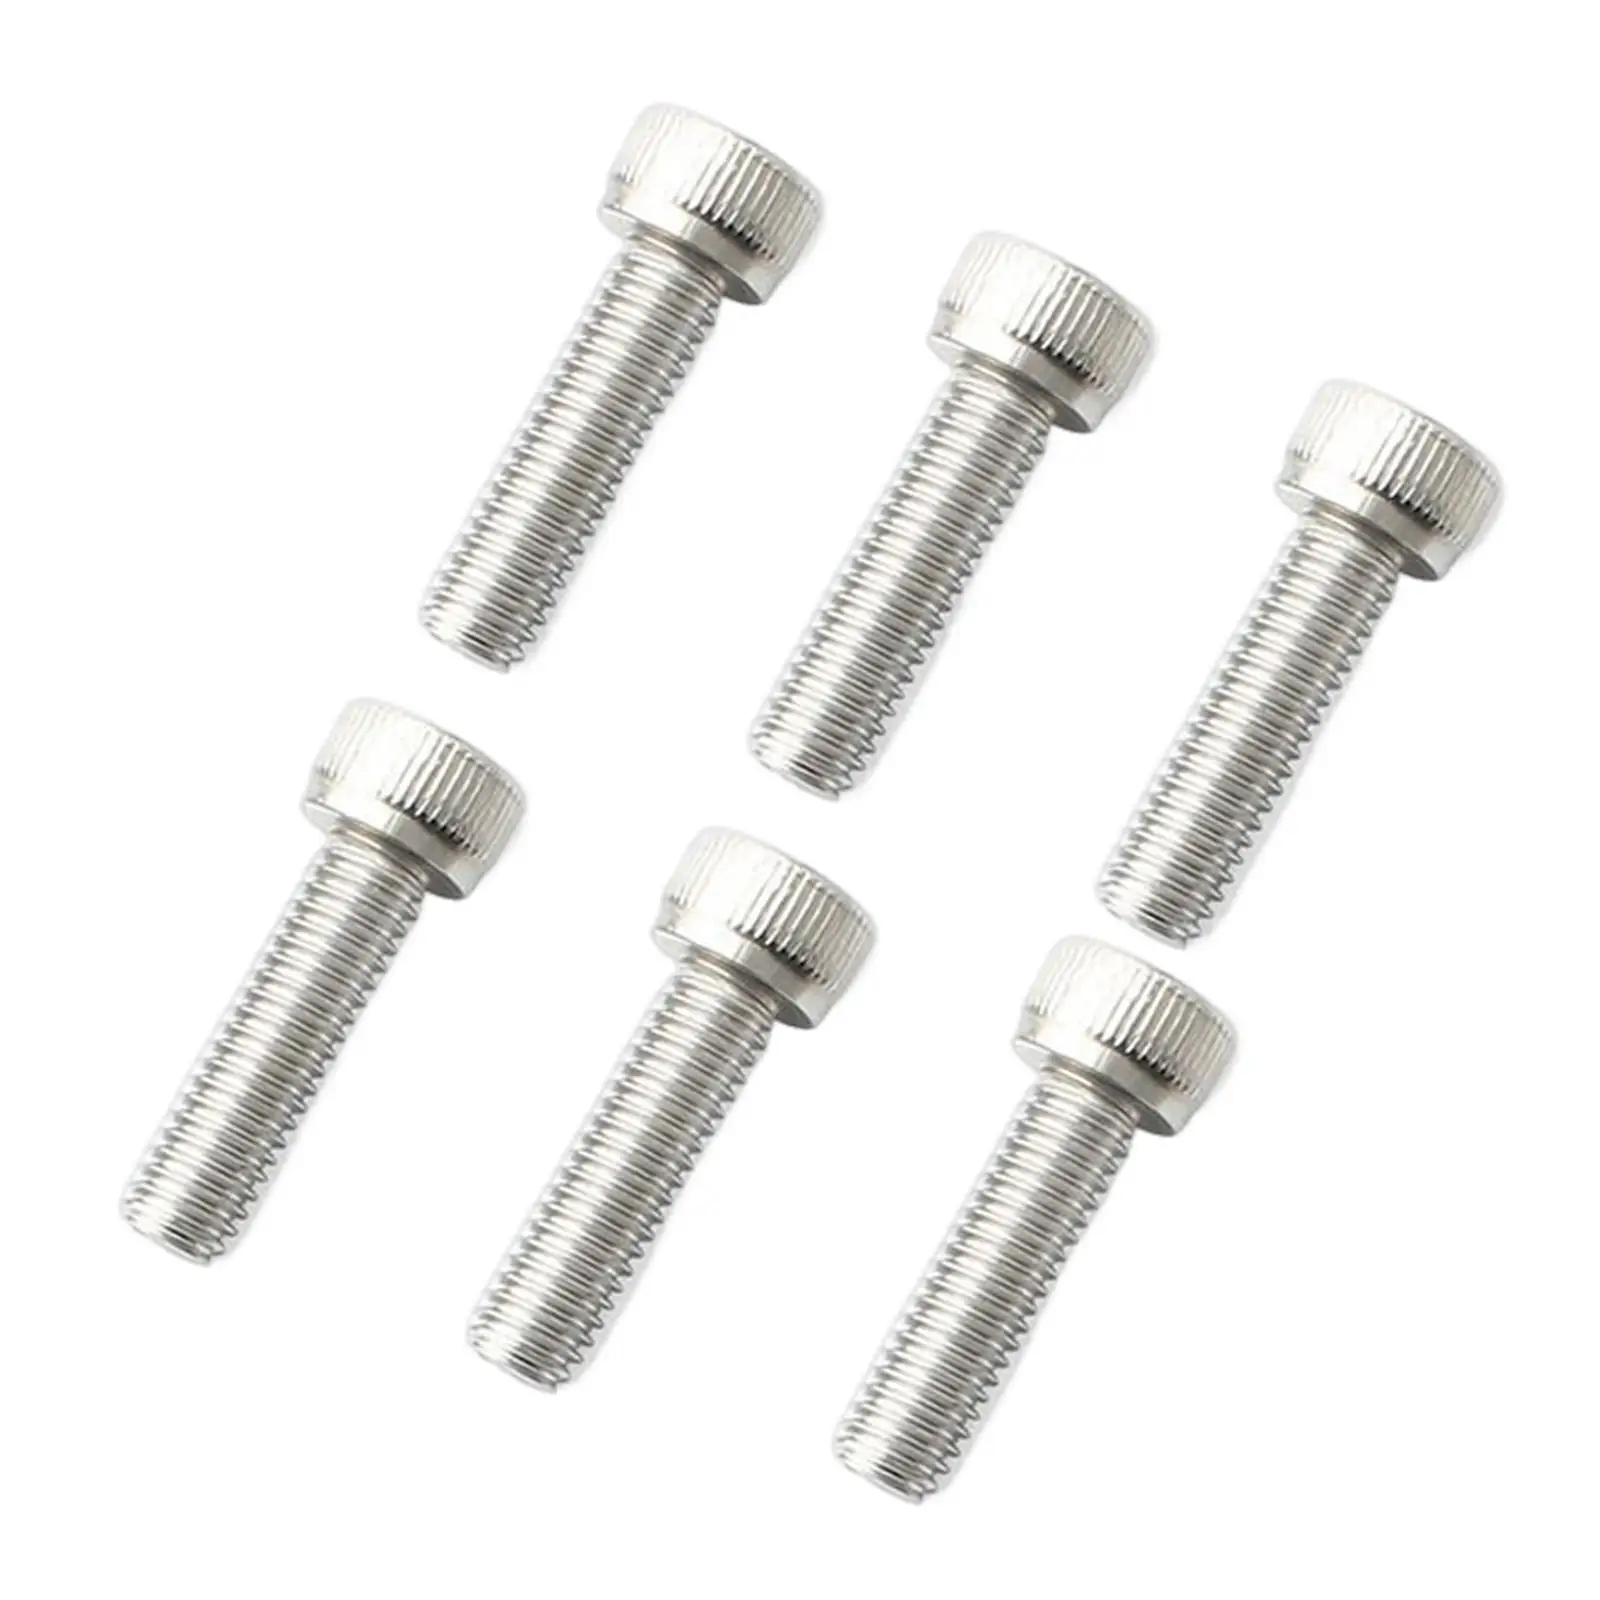 6x High Strength Bicycle Stem Screws M5x18mm Bolts Water Bottle Cage Repairing Hardware